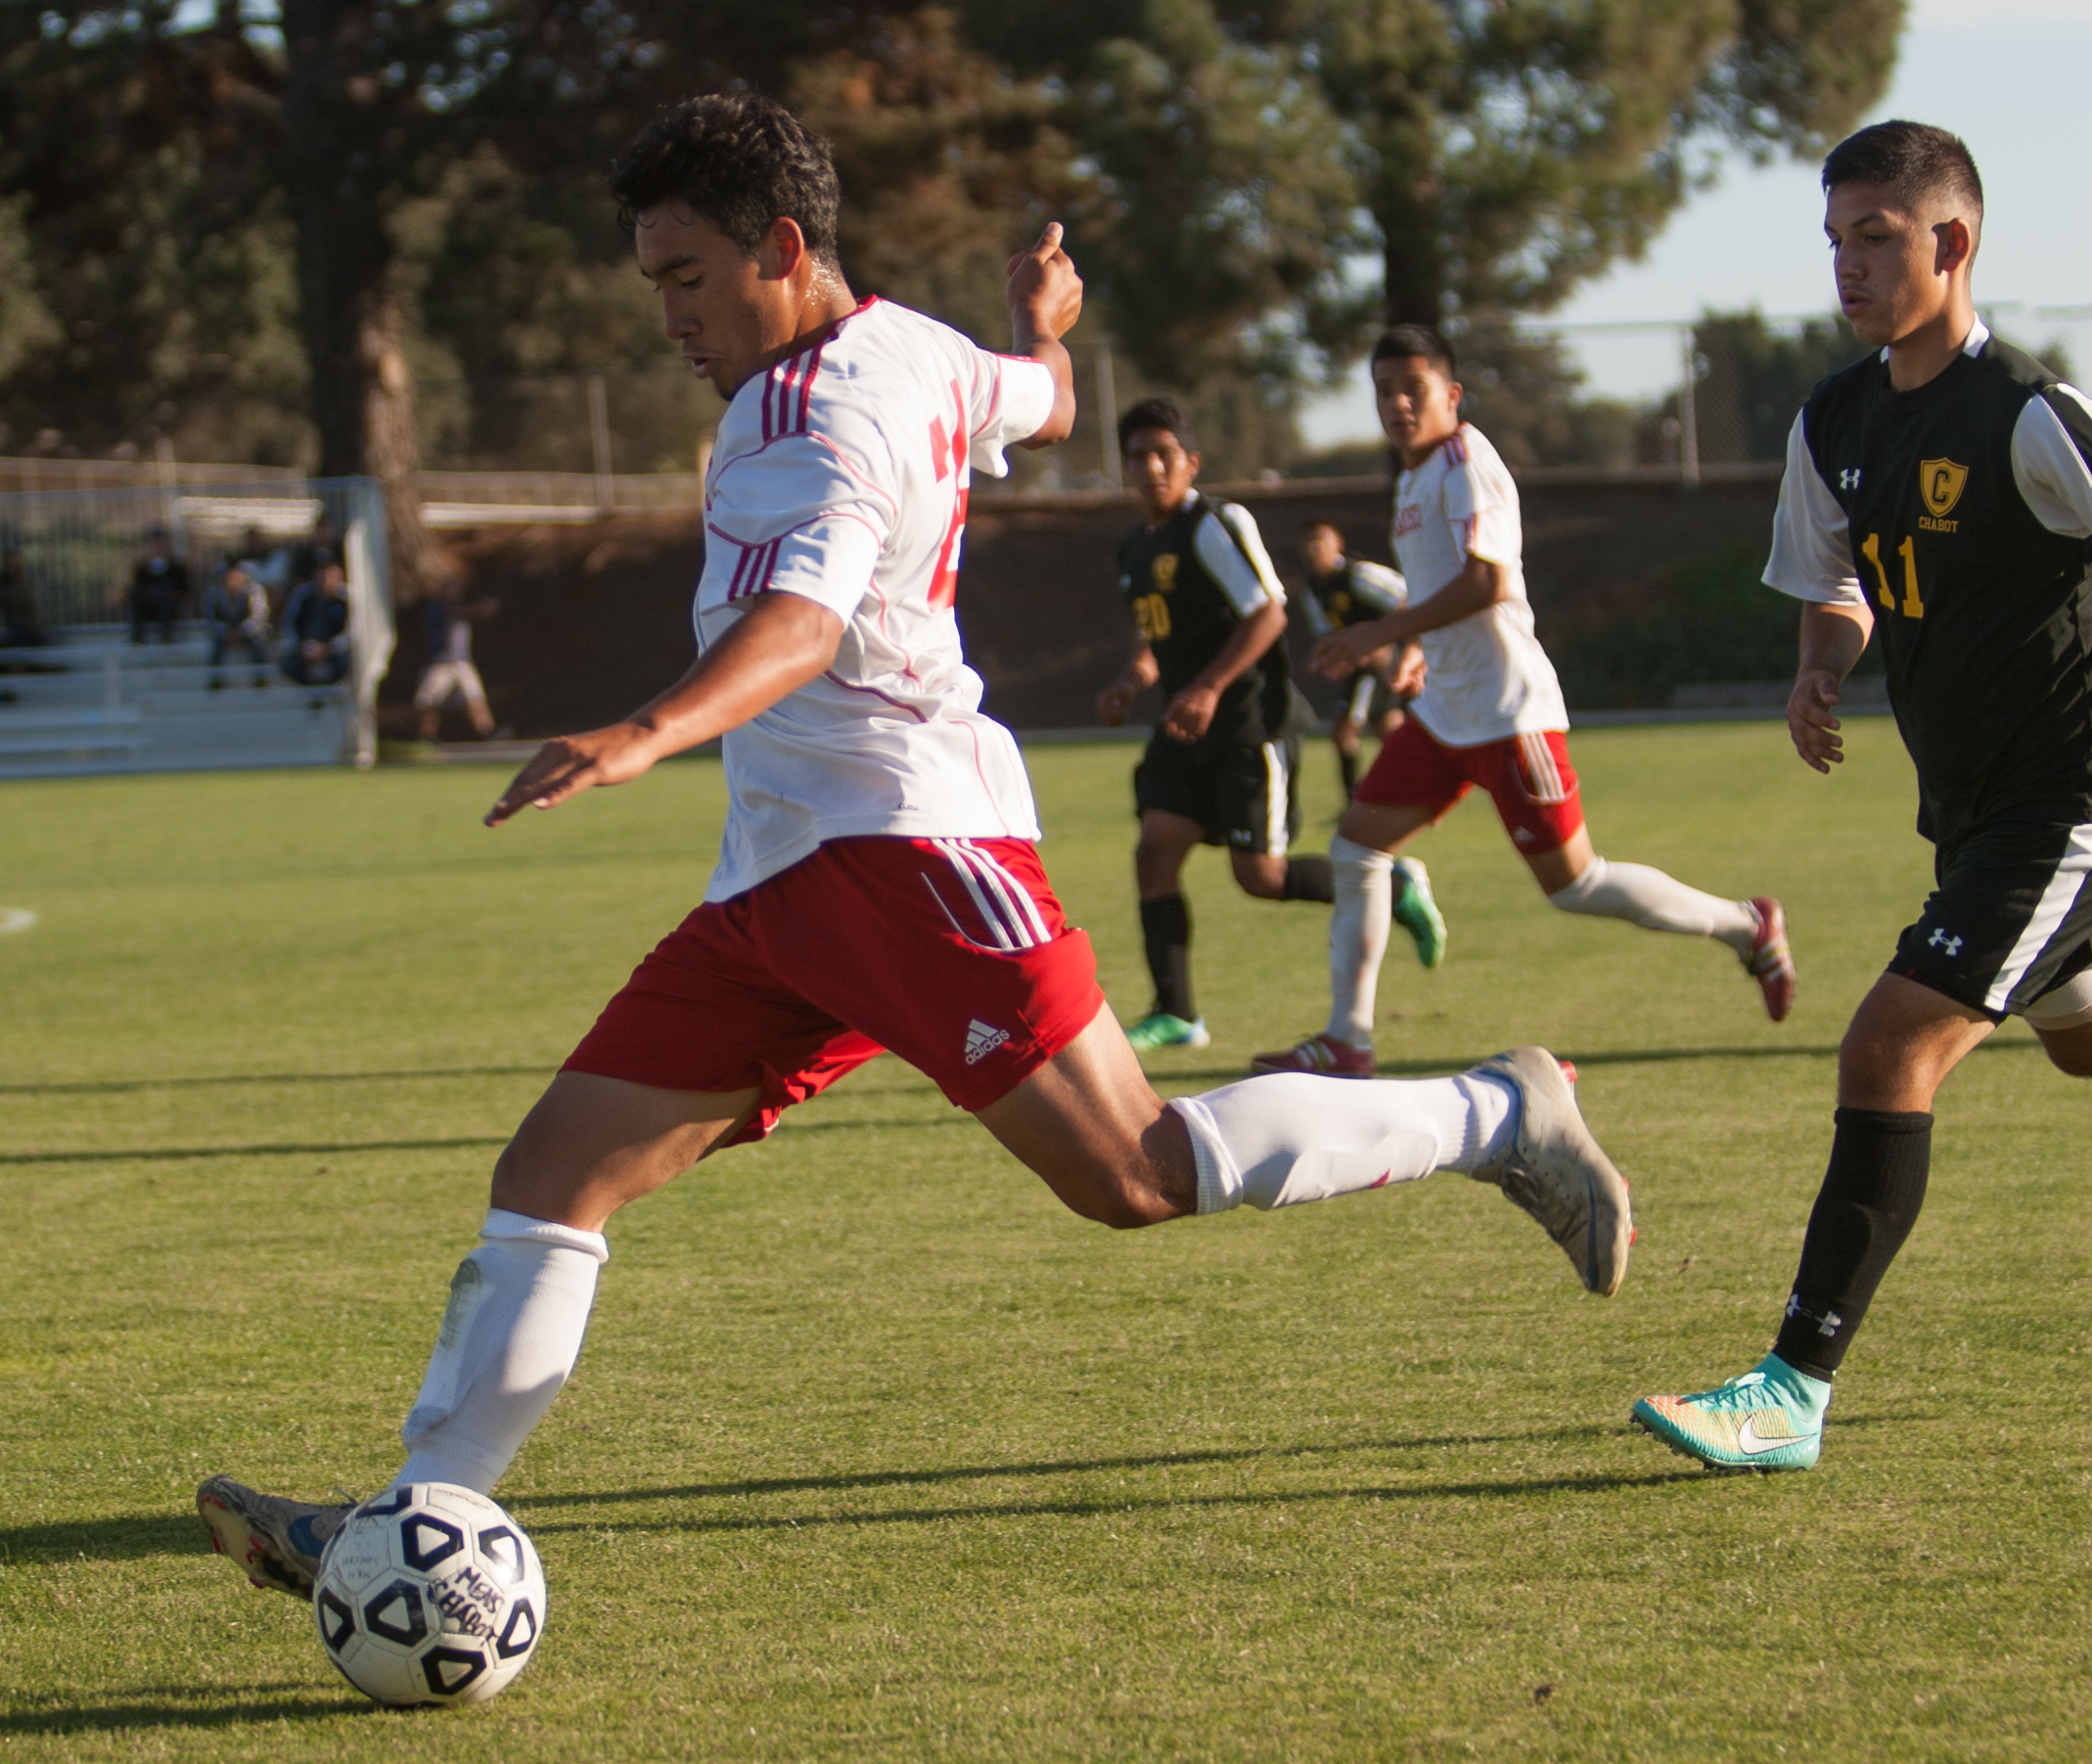 City College Rams soccer player strikes the ball. (Photo by Khaled Sayed)